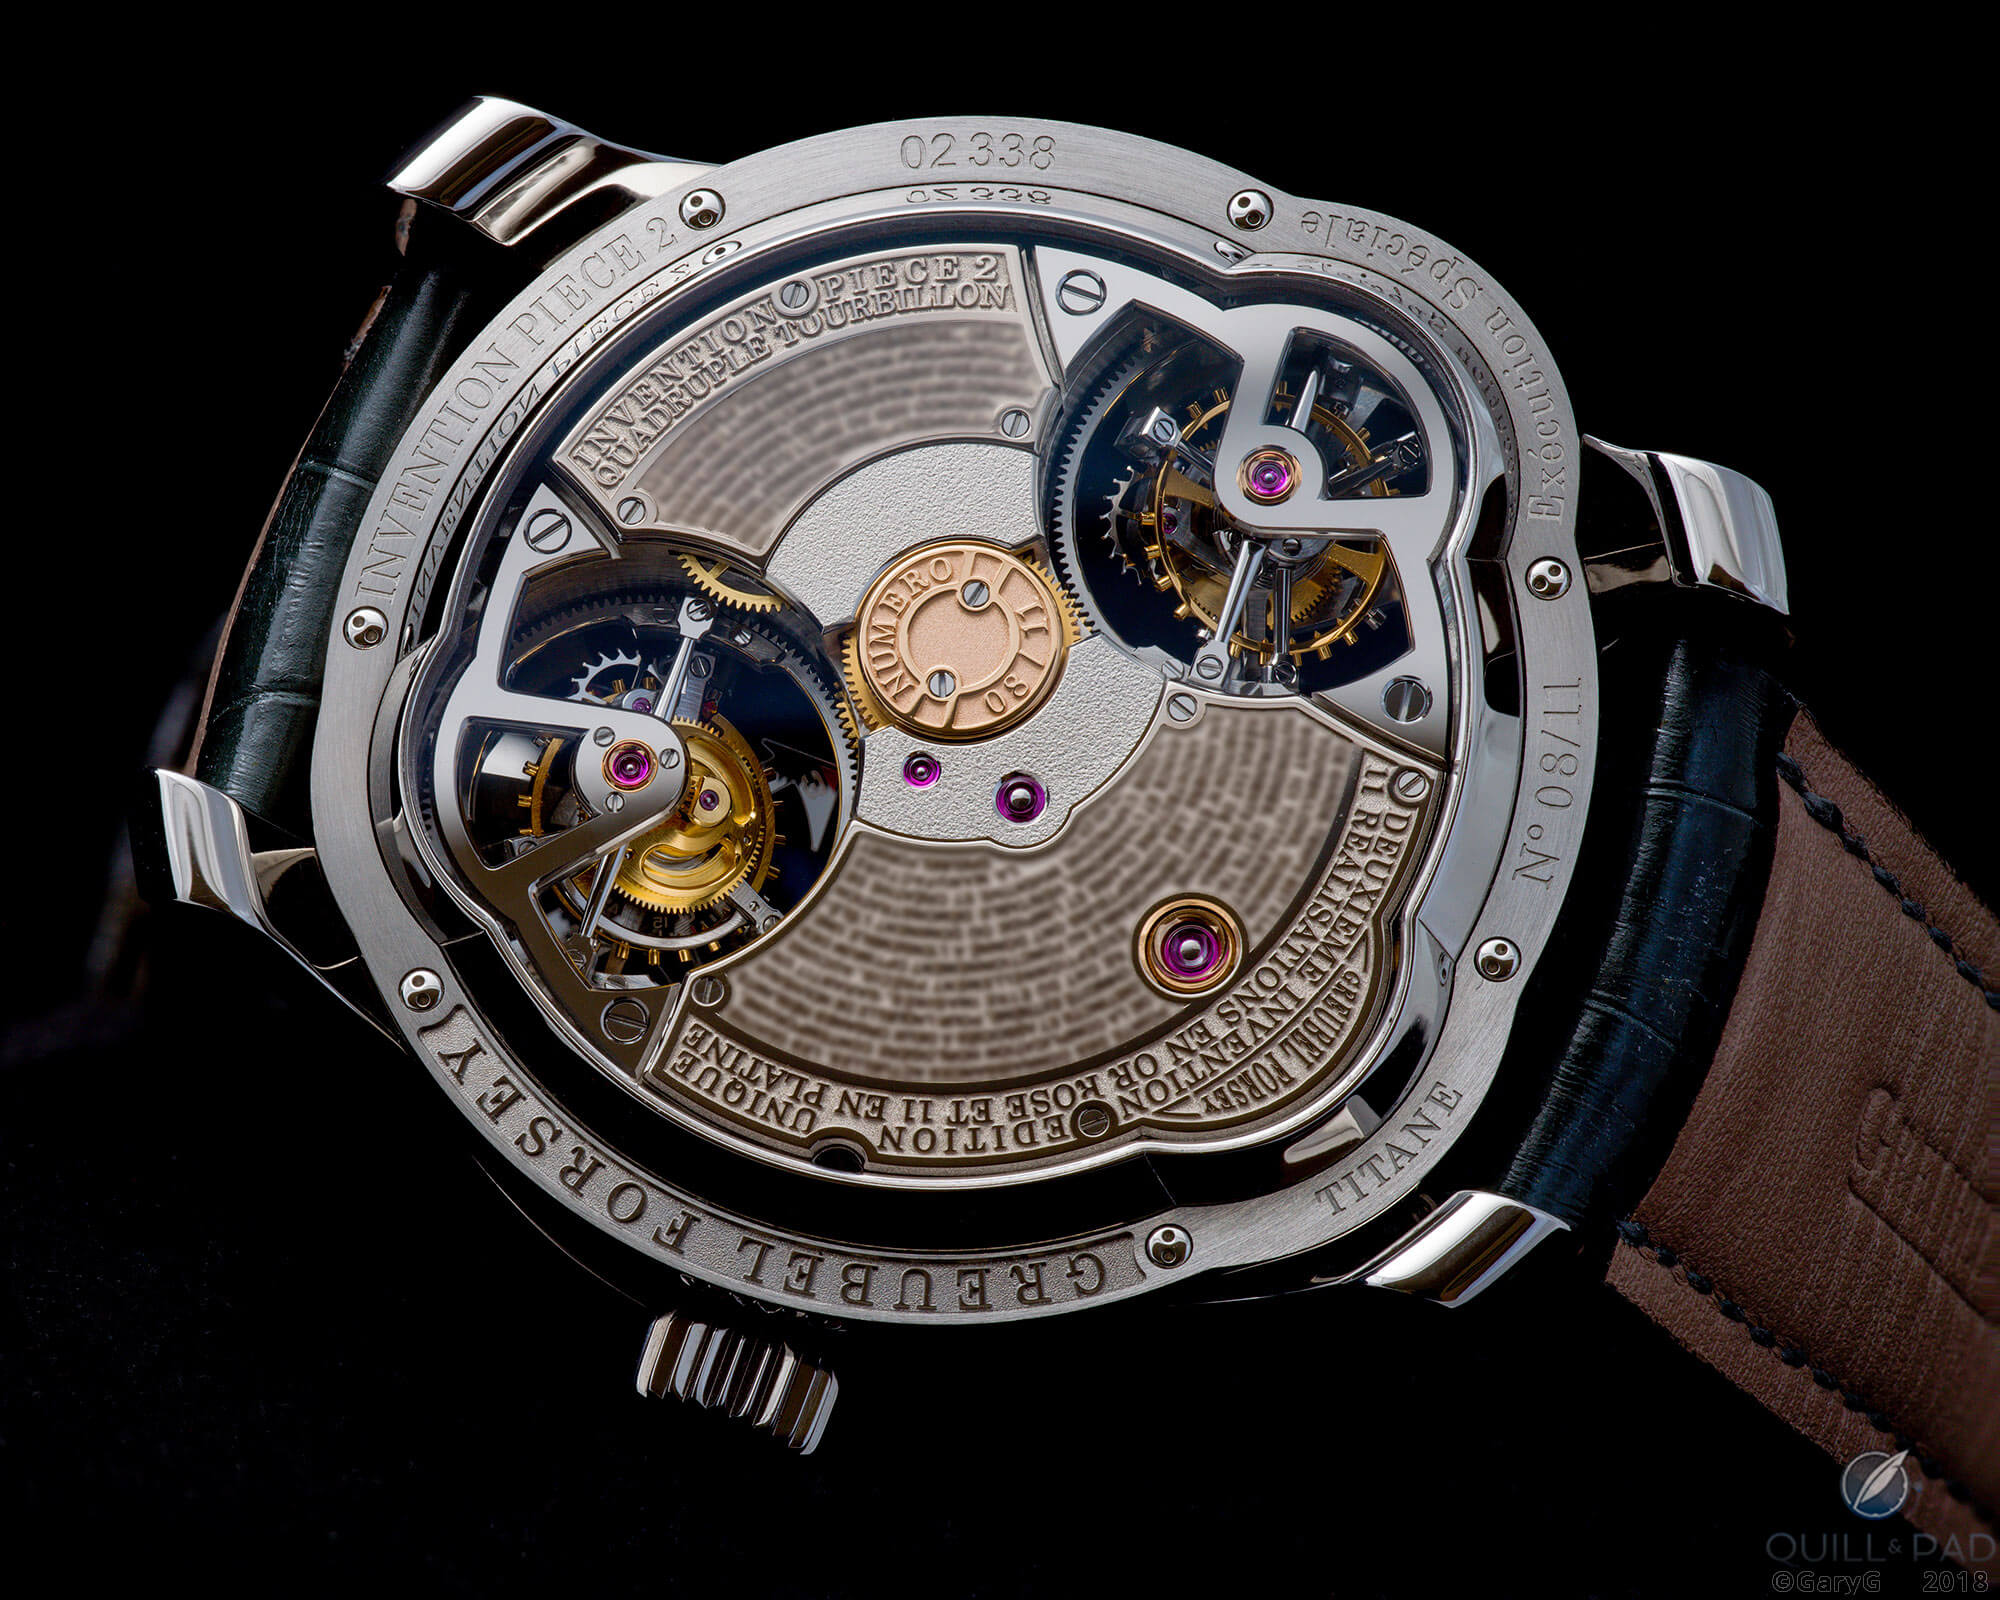 Reverse side of the Greubel Forsey Invention Piece 2